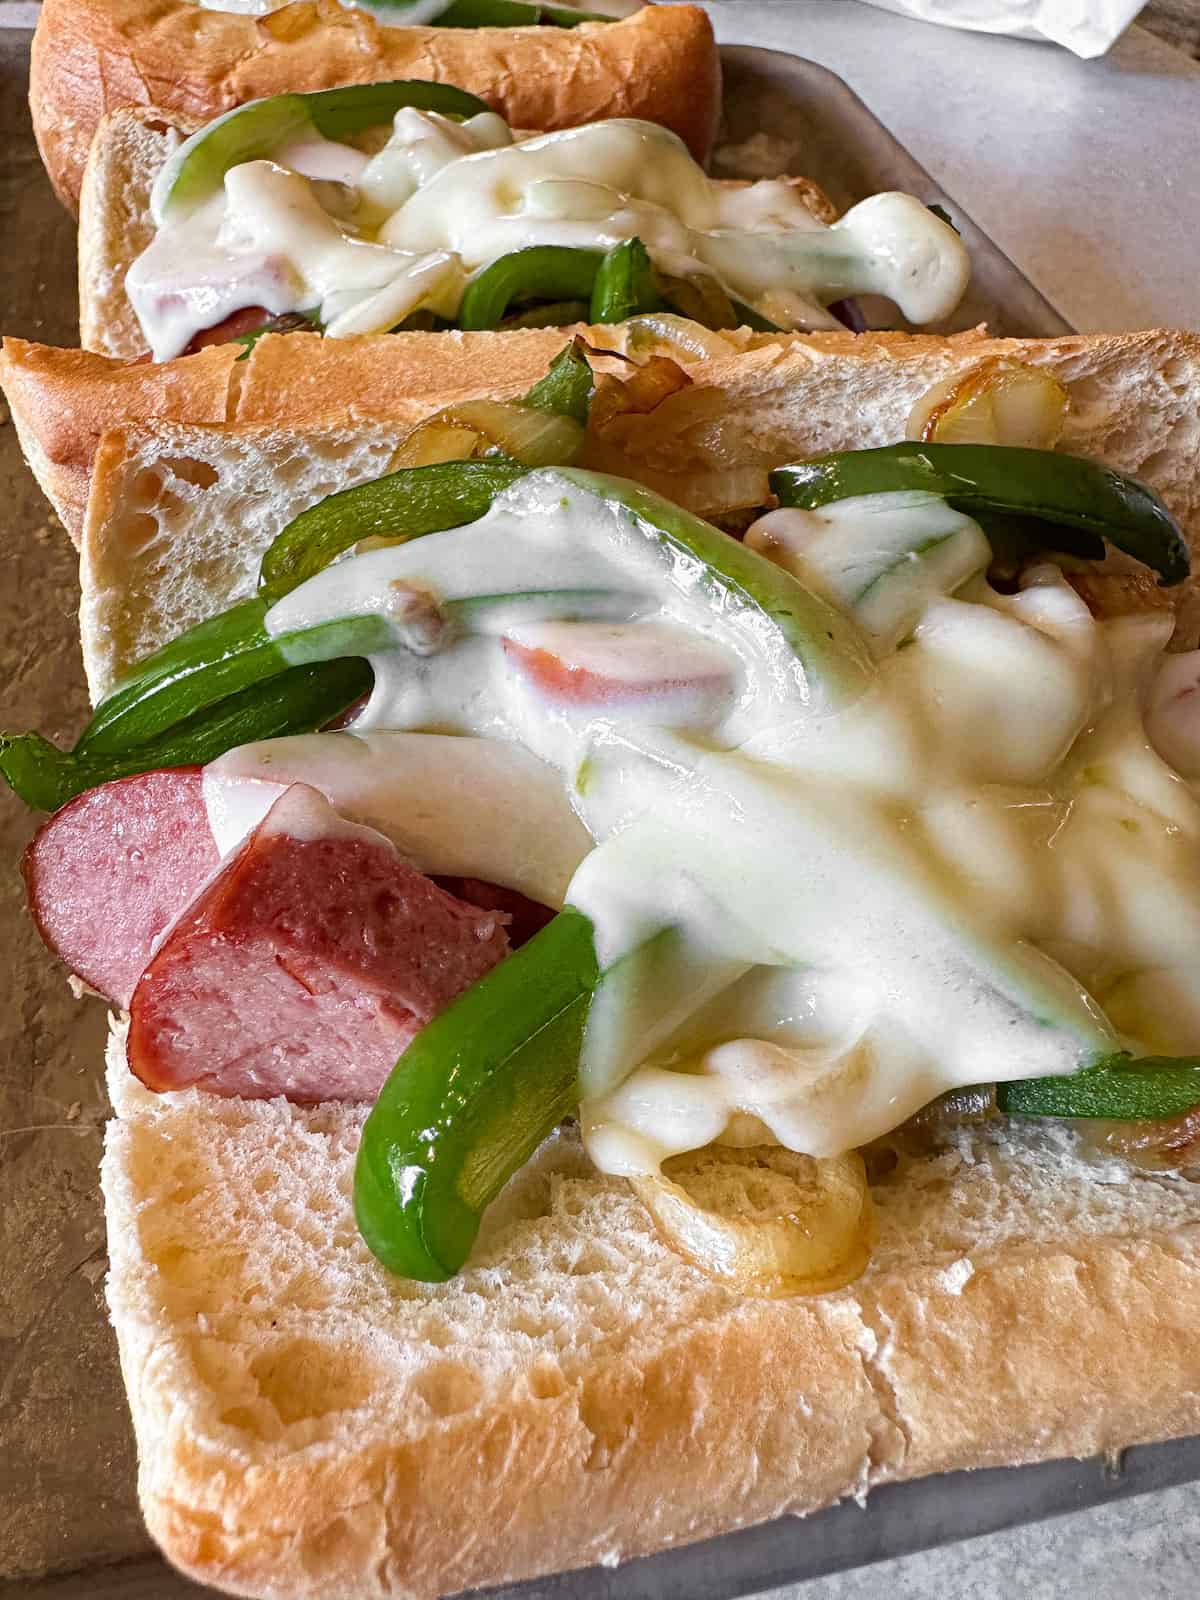 Kielbasa sandwiches with peppers and onions.